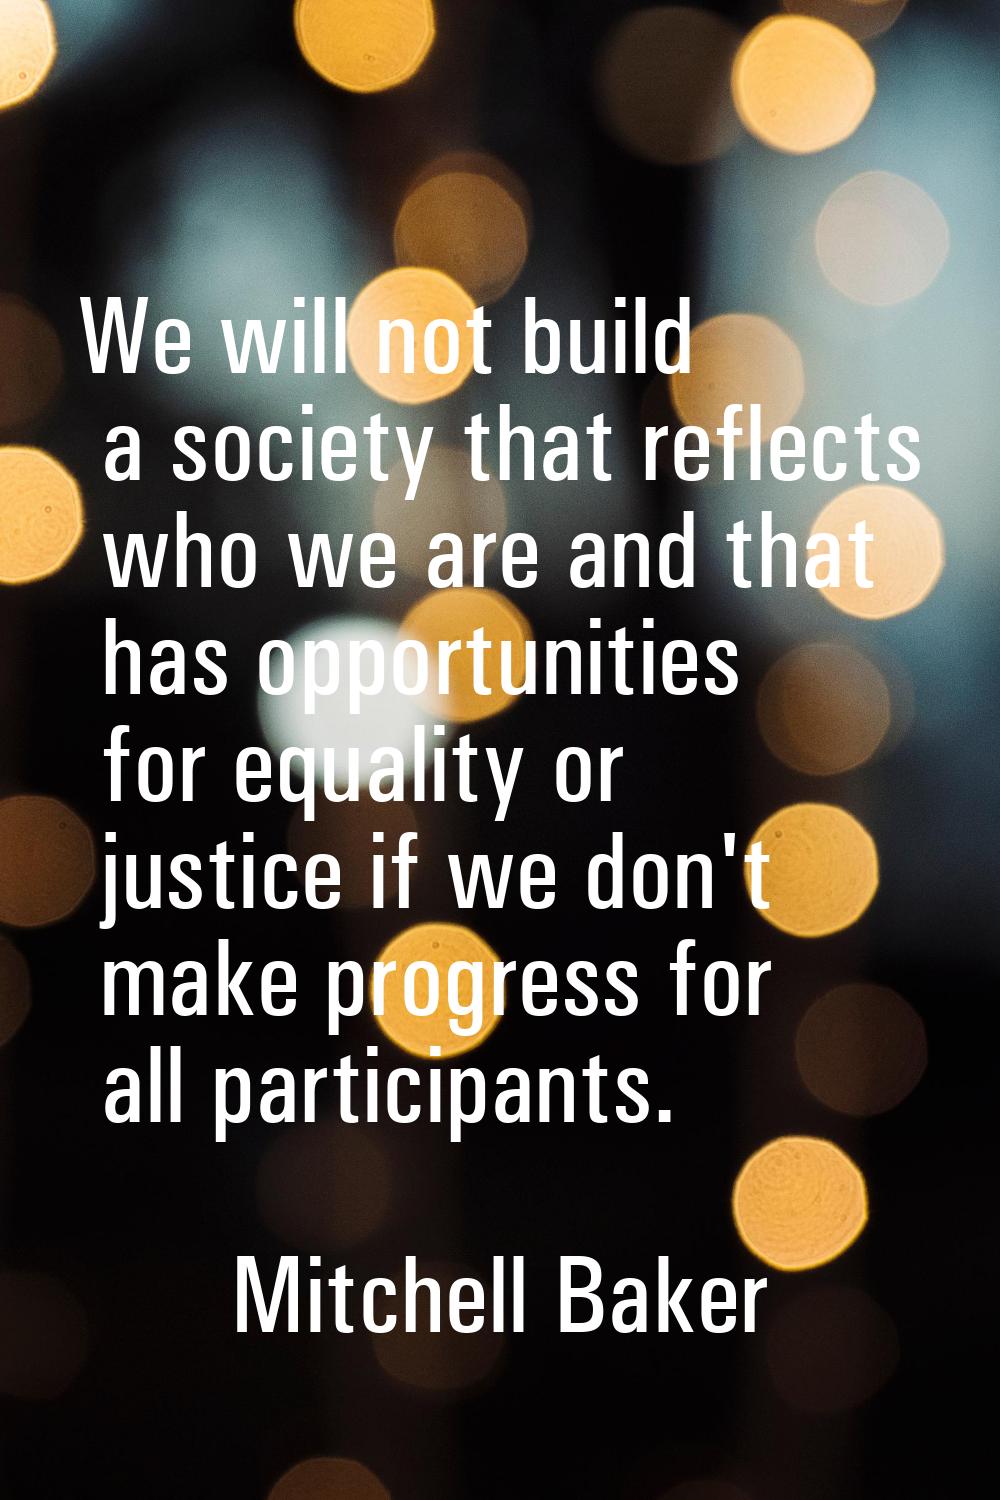 We will not build a society that reflects who we are and that has opportunities for equality or jus